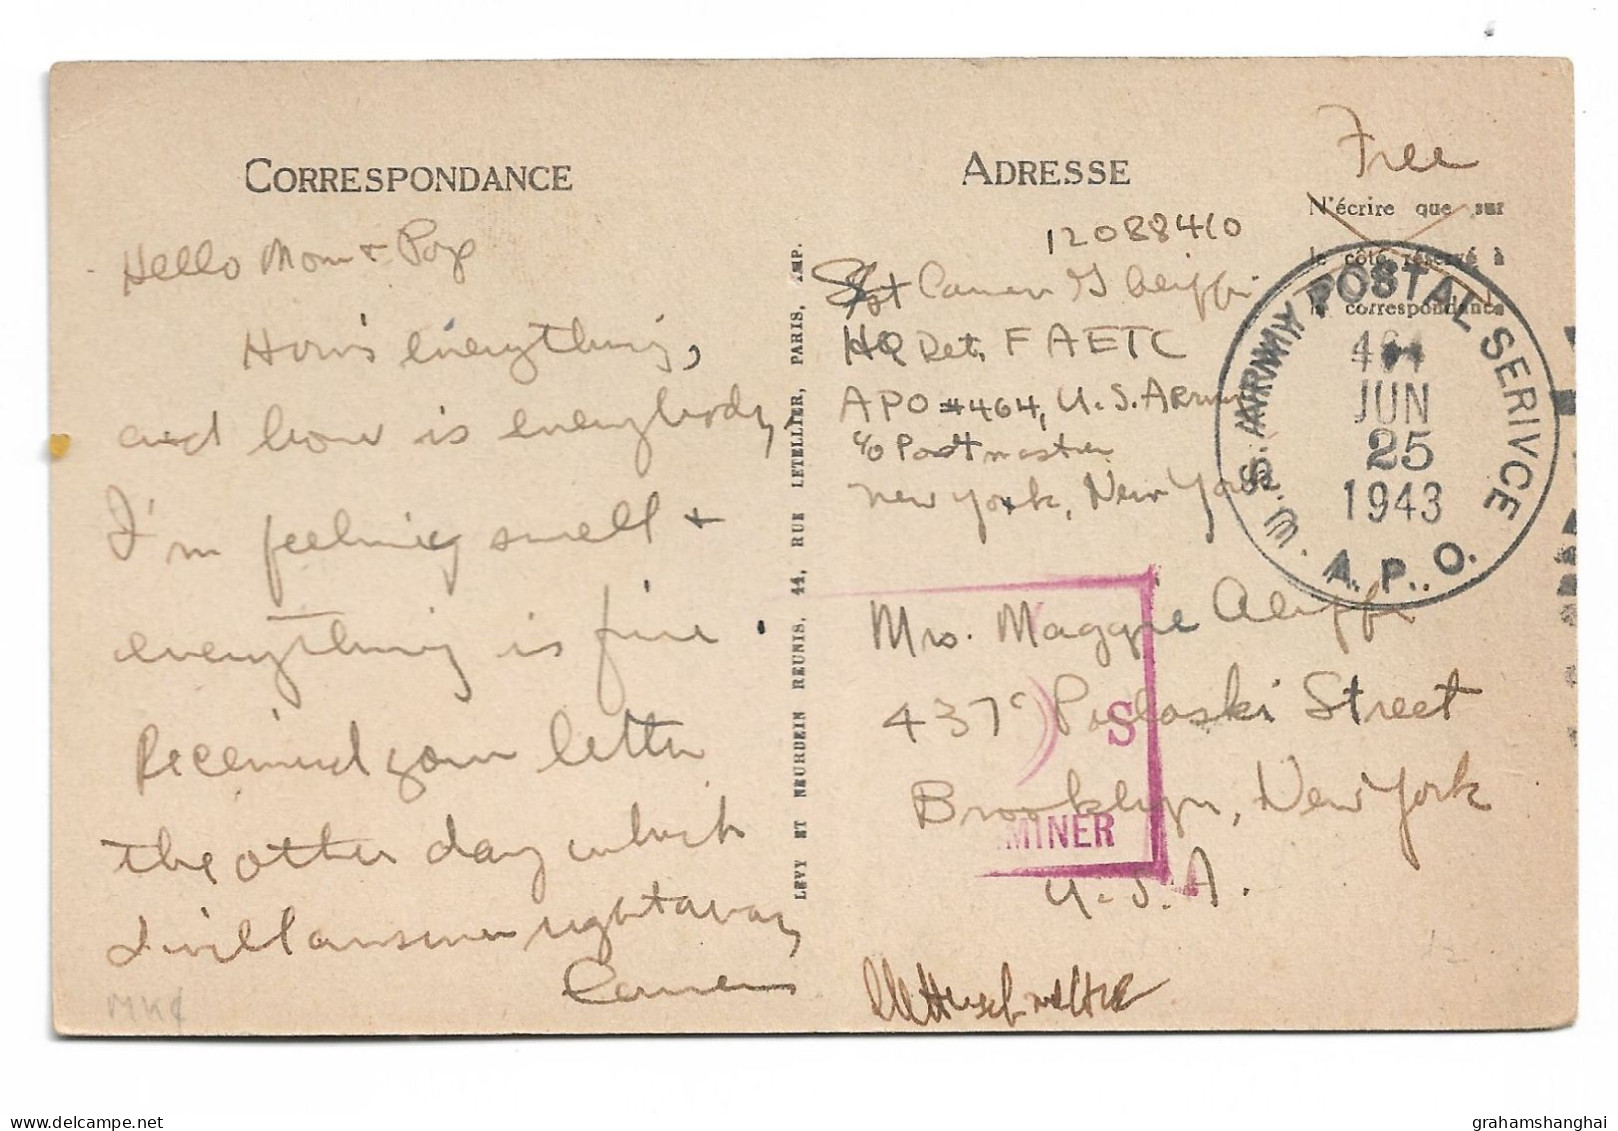 Postcard WW2 North Africa US Army Post Office APO 464 Fifth Army Tunisia ? Posted June 1943 Aliffi Family New York USA - Guerre 1939-45